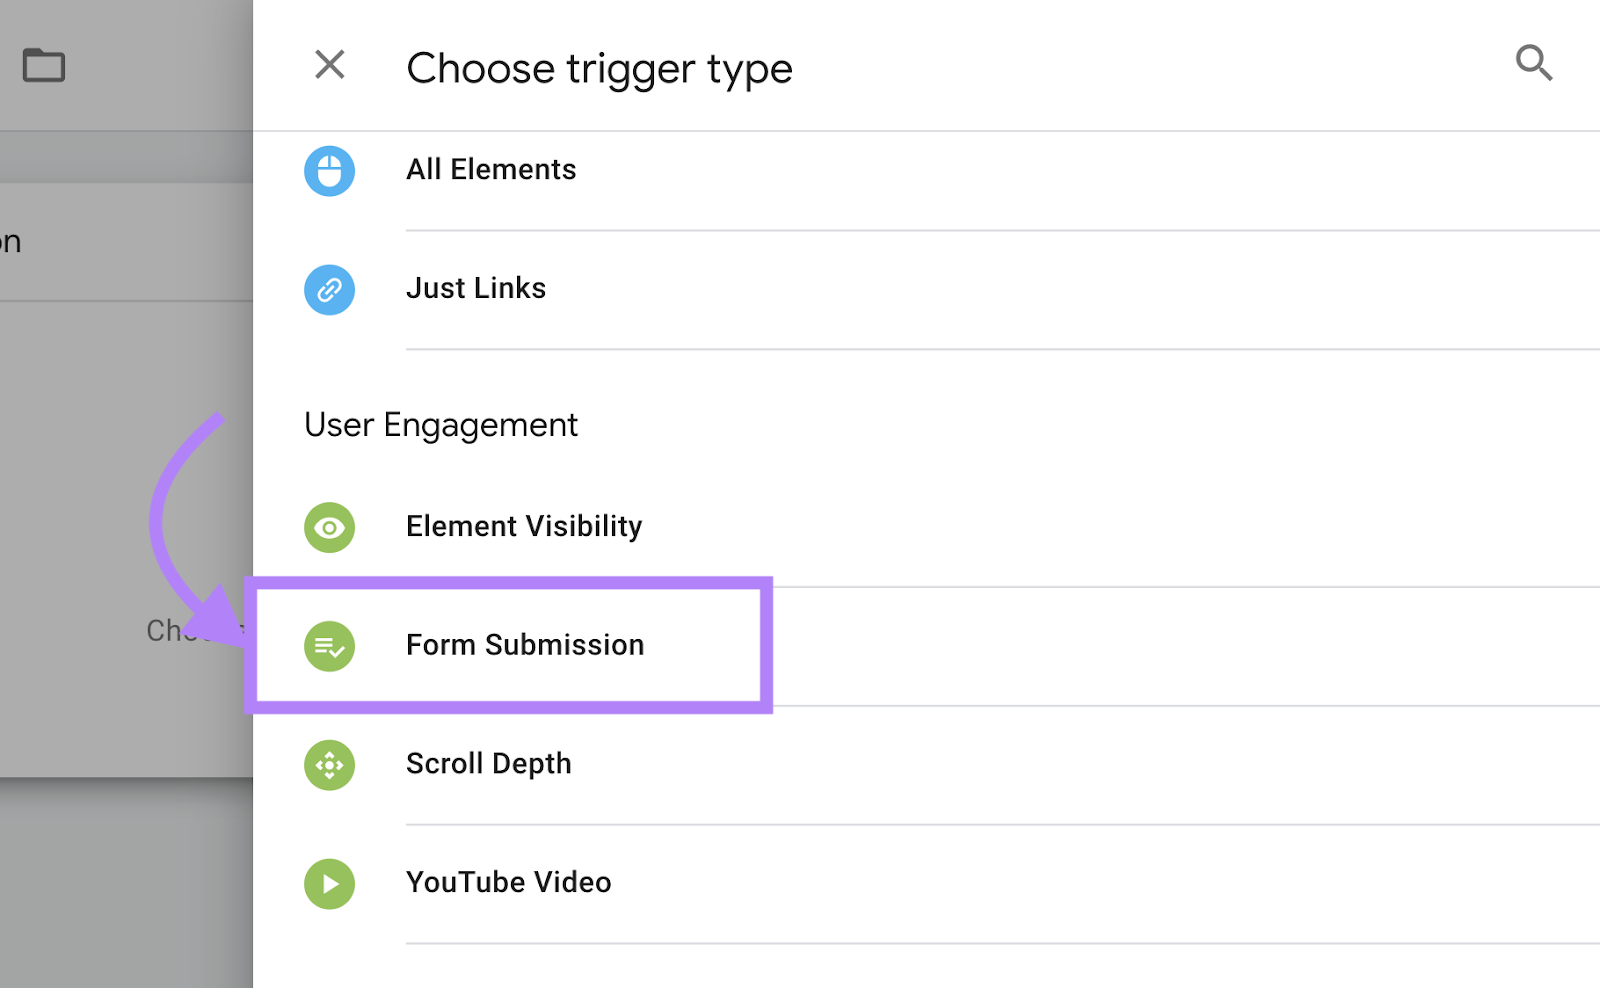 “Form Submission" selected under "Choose trigger type" menu